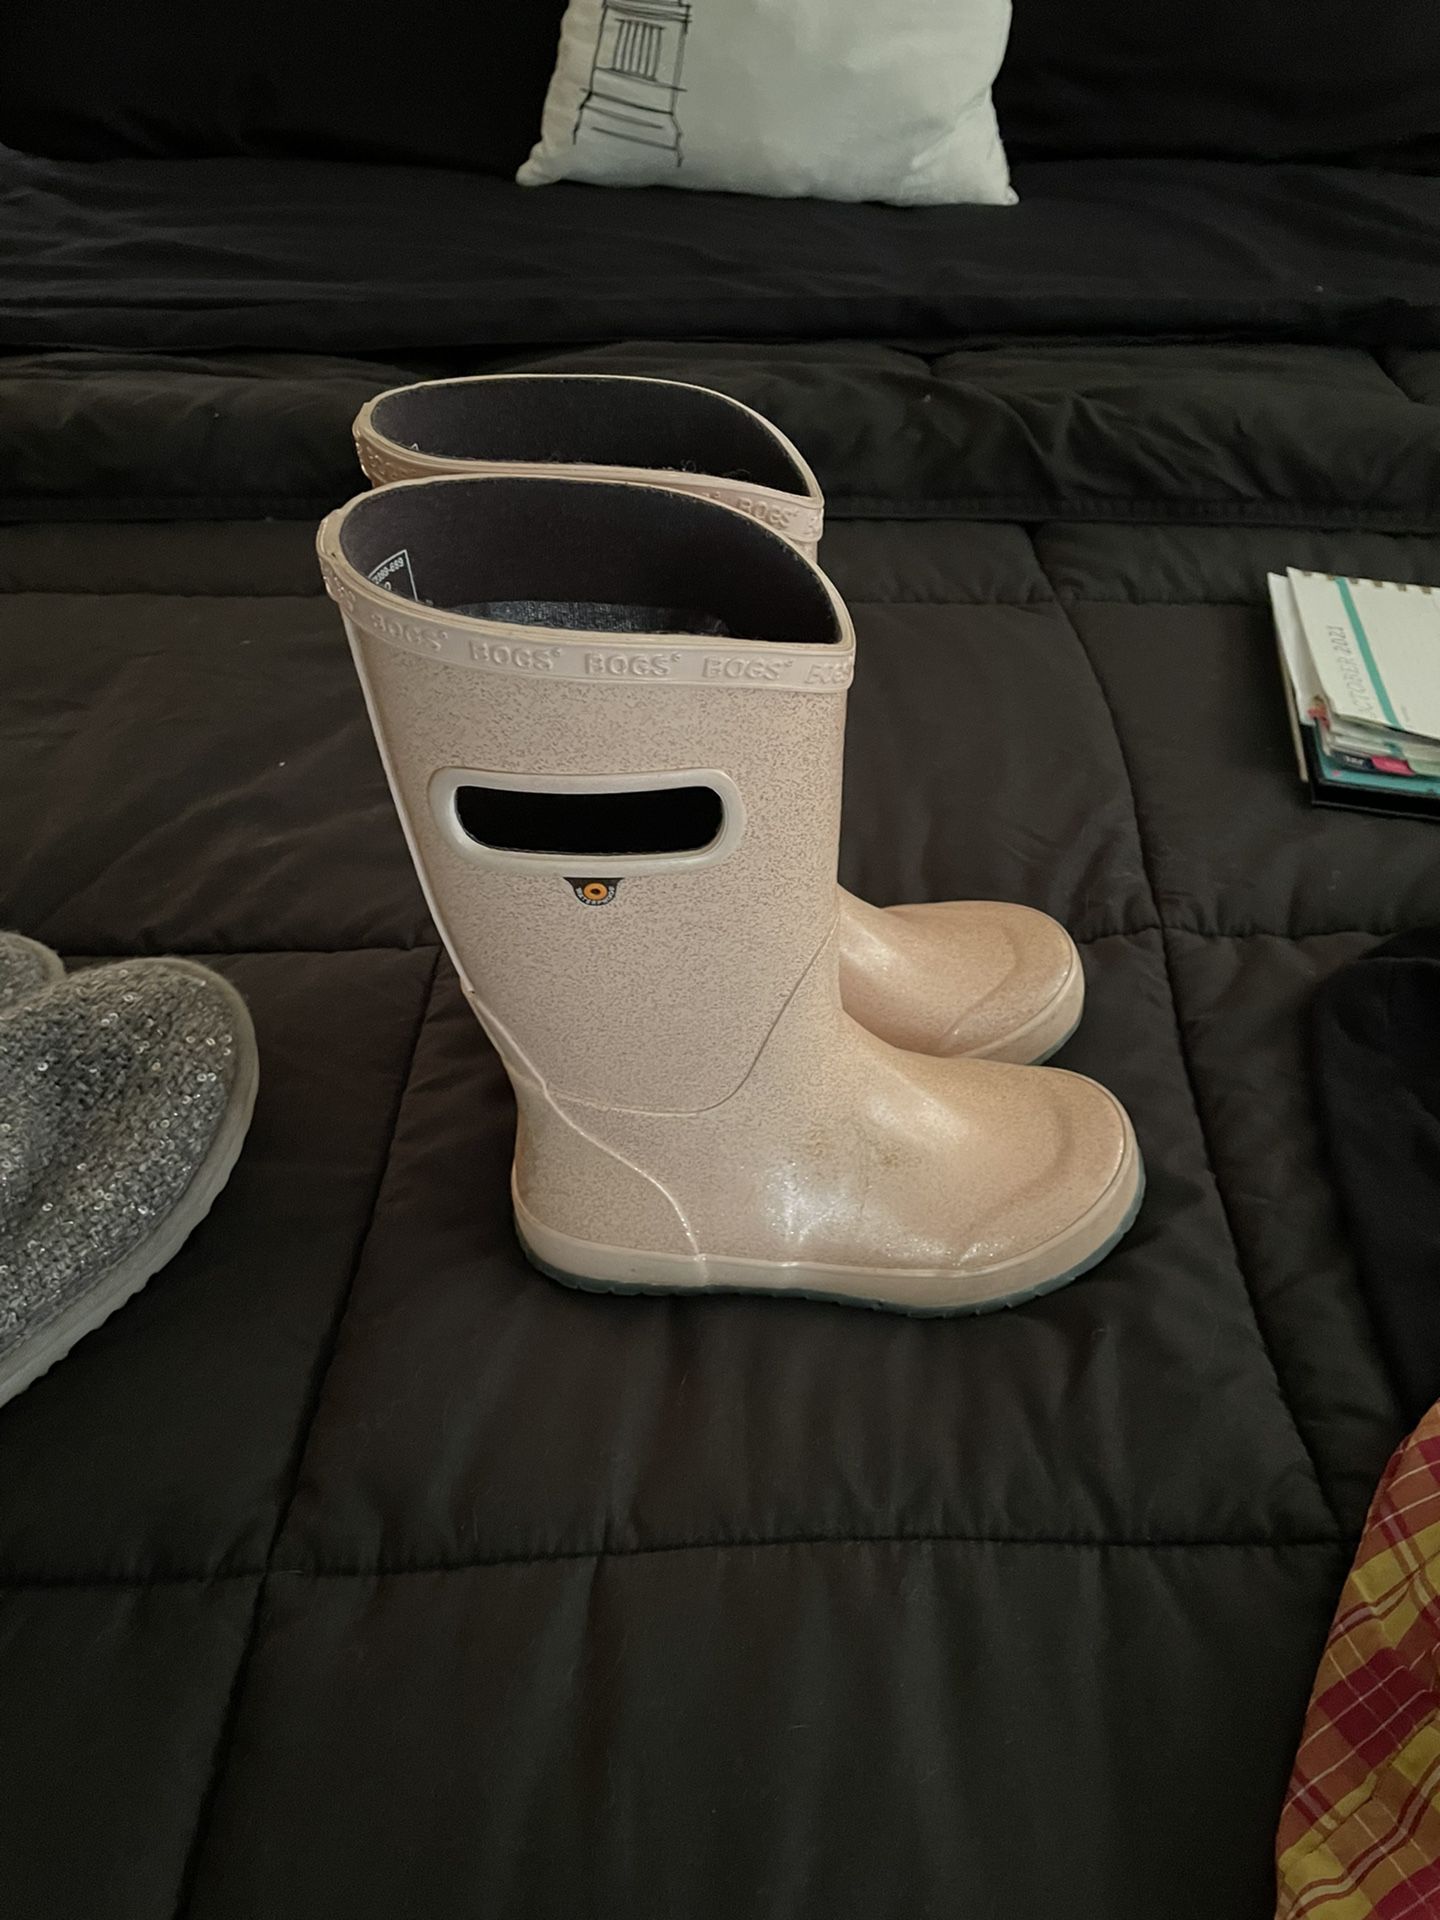 Used girl size 1 rain boots